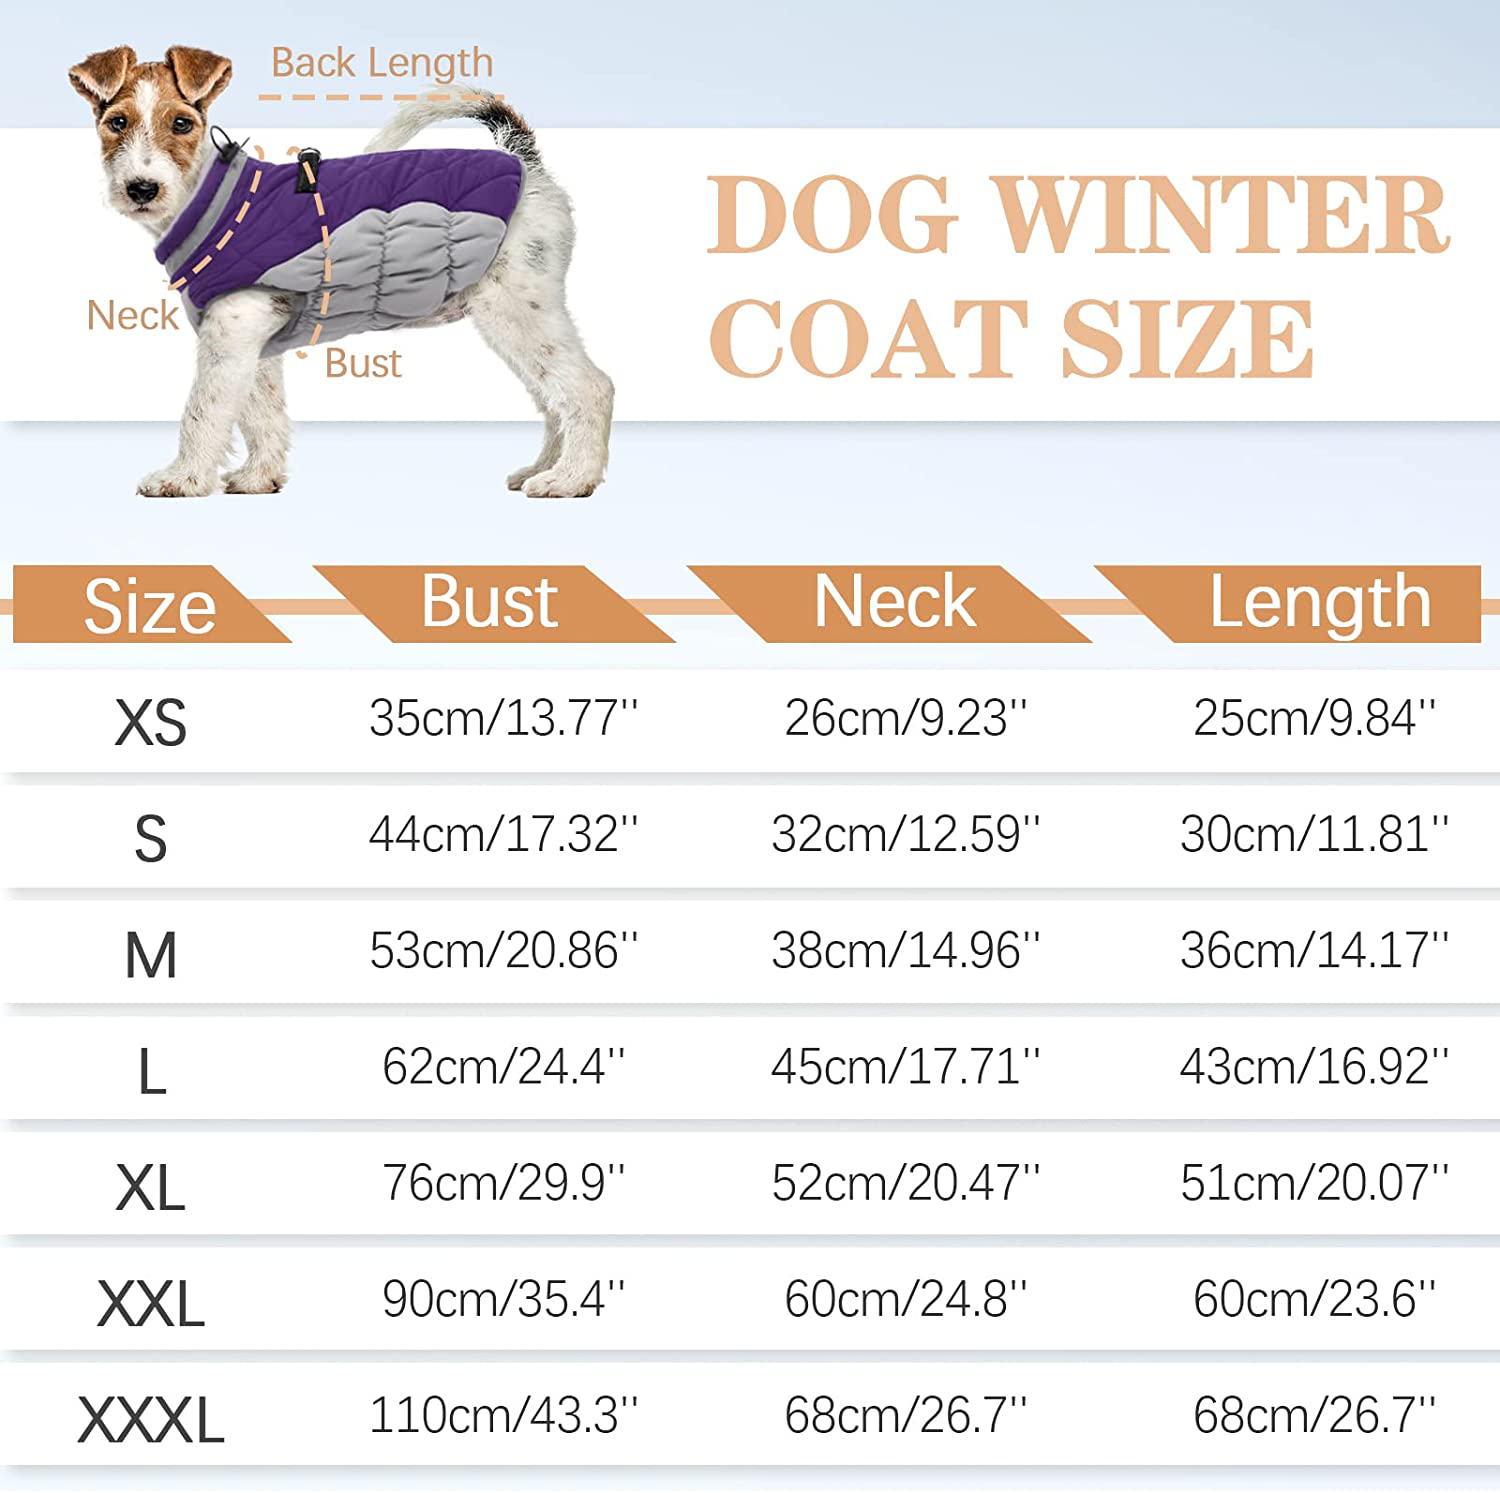 Dog Winter Jacket Cozy Reflective Waterproof Dog Coat Windproof Warm Pet Garment, Comfortable Cold Weather Fleece Apparel Outfits with Zipper Closure for Small Medium Large Dogs Puppy Walking Hiking